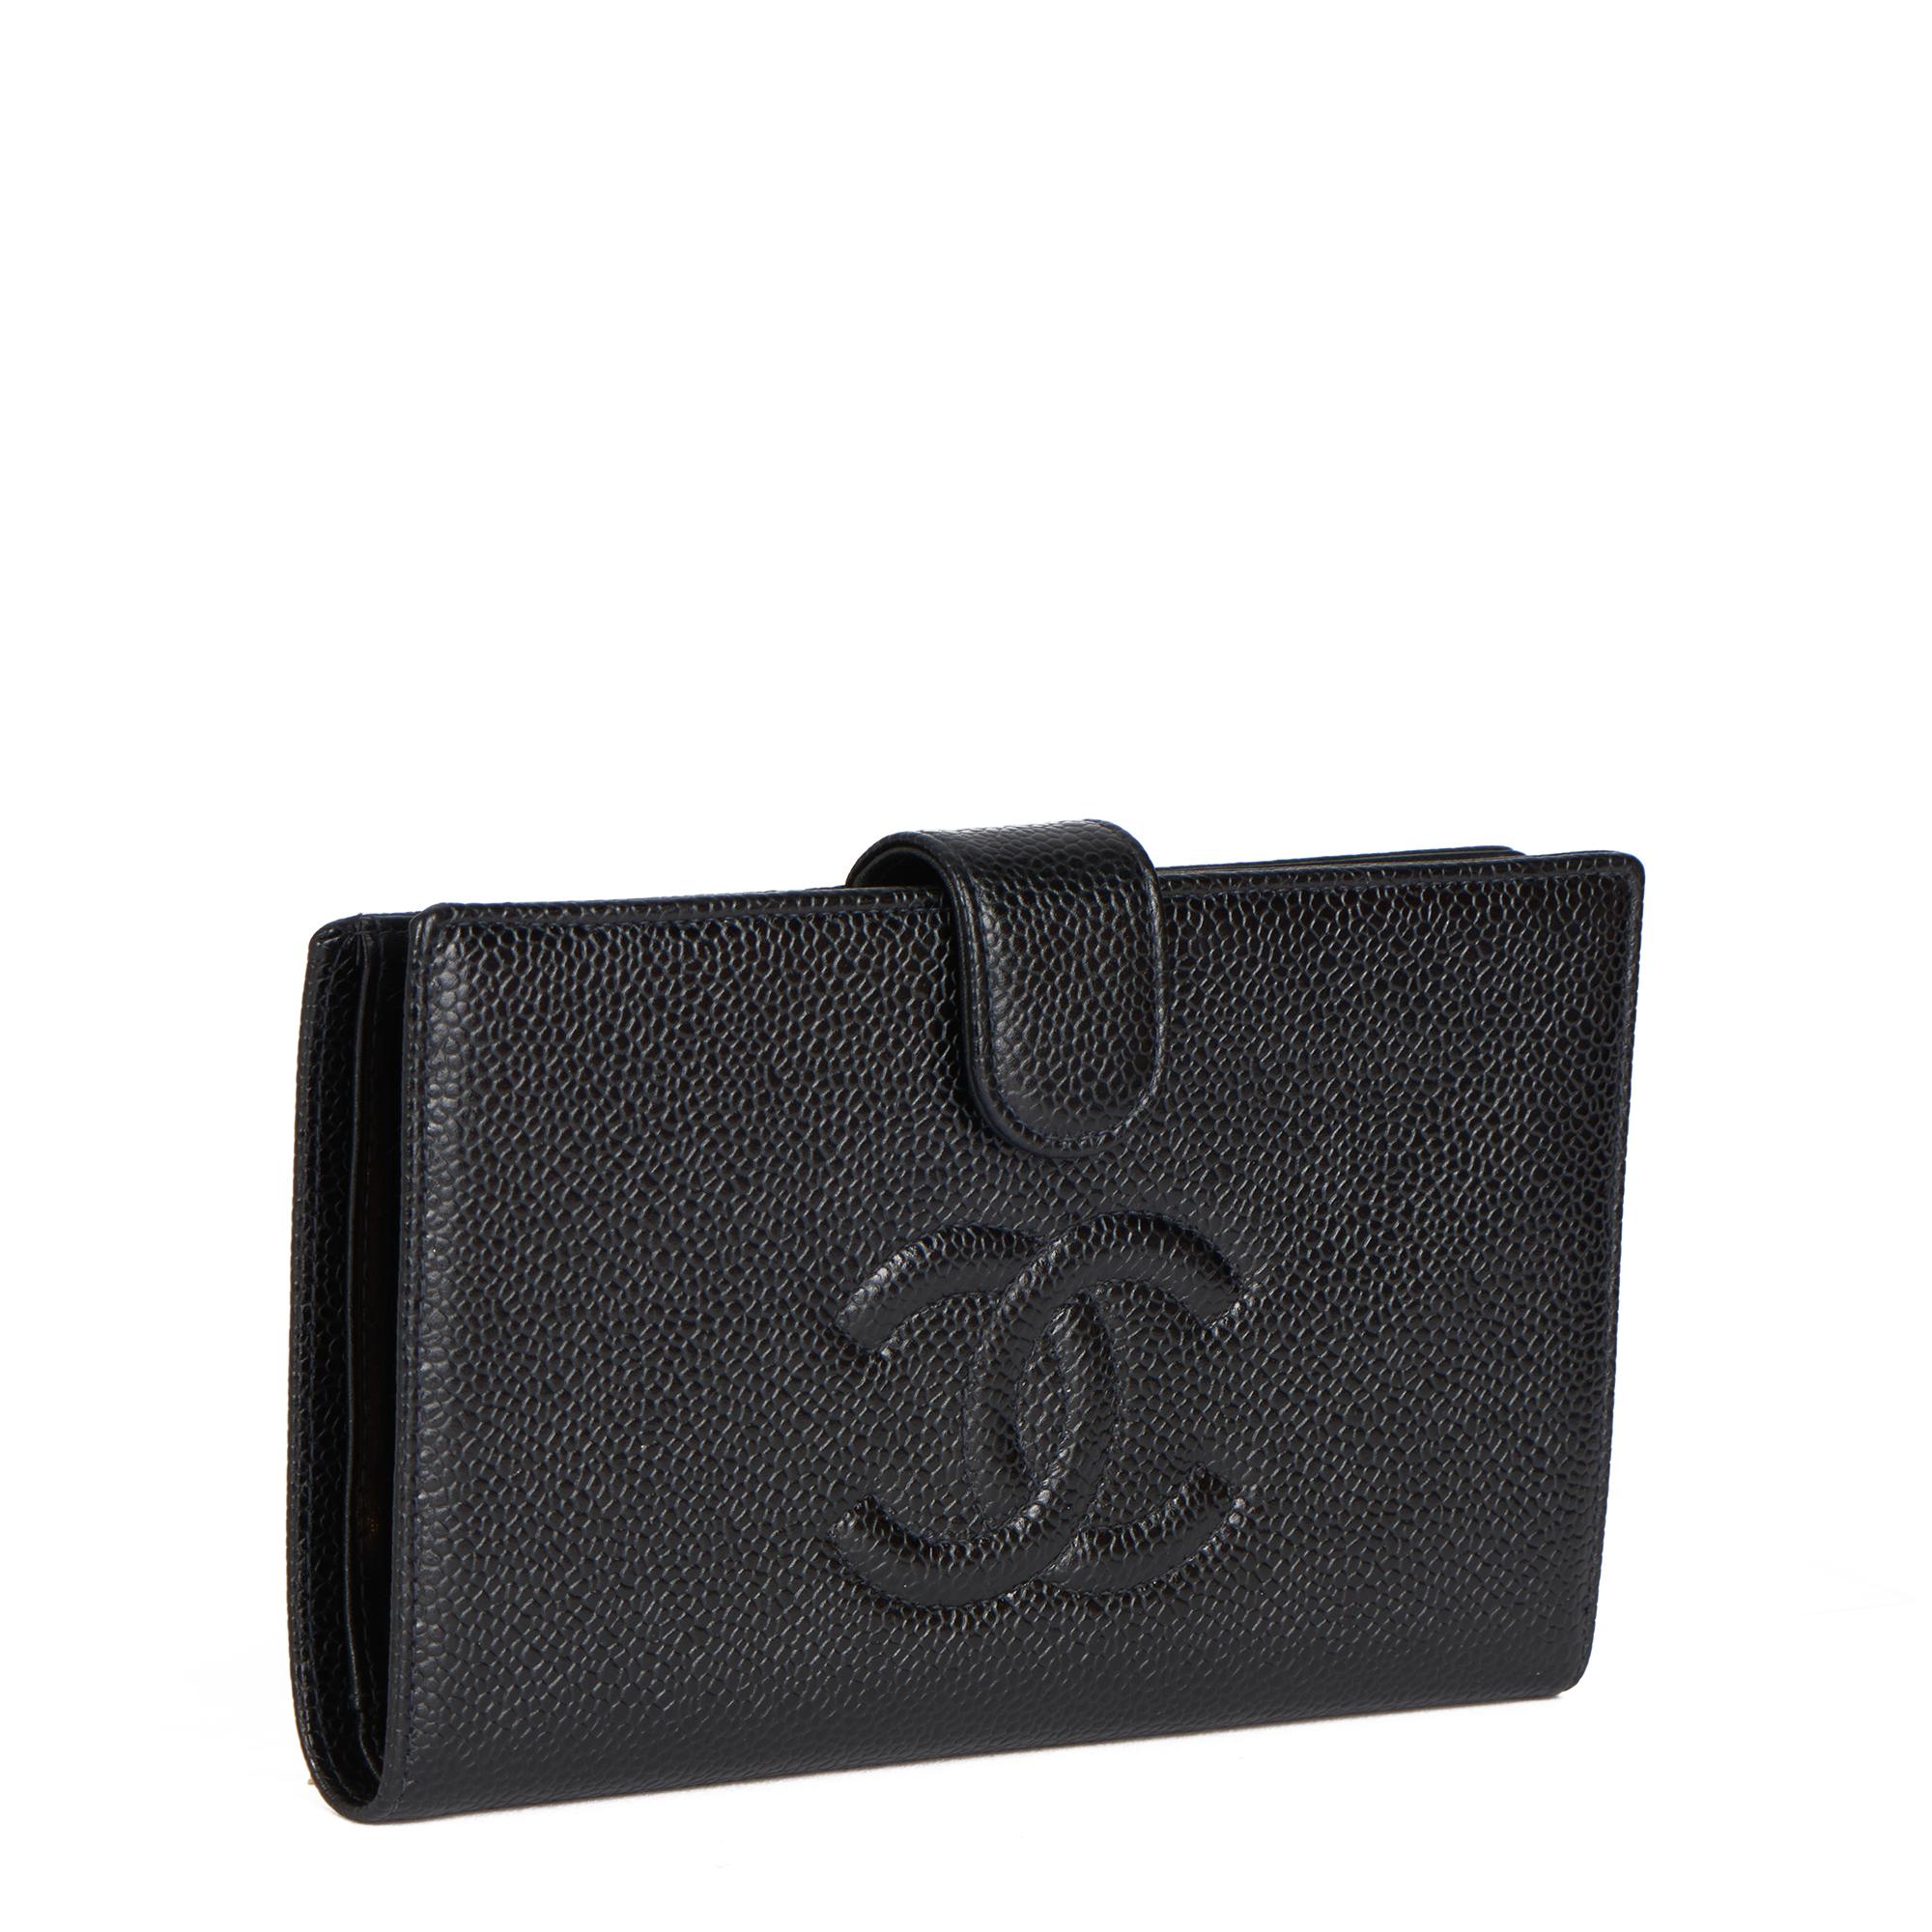 CHANEL
Black Caviar Leather Vintage Timeless Long Wallet

Xupes Reference: HB4168
Serial Number: 6324526
Age (Circa): 2000
Authenticity Details: Serial Sticker (Made in France)
Gender: Ladies
Type: Wallet

Colour: Black
Hardware: Gold 
Material(s):